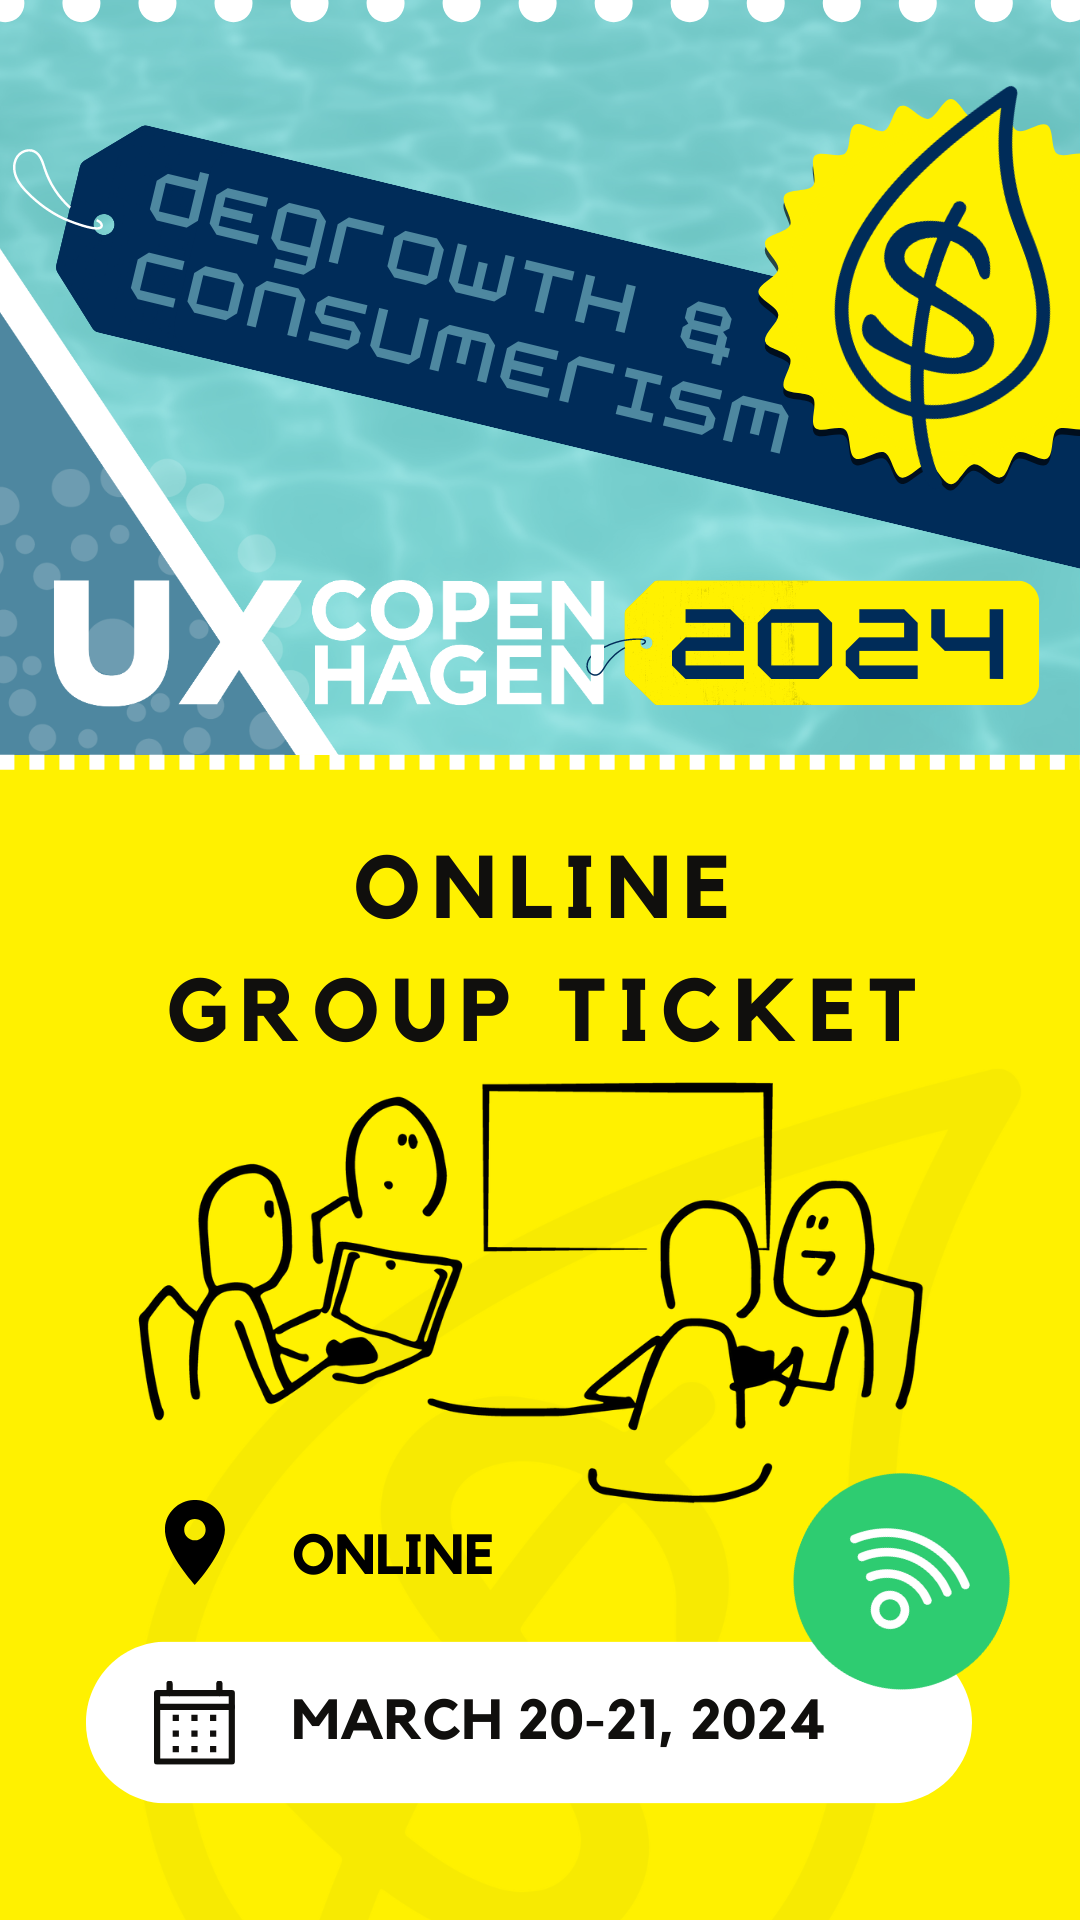 Group ticket